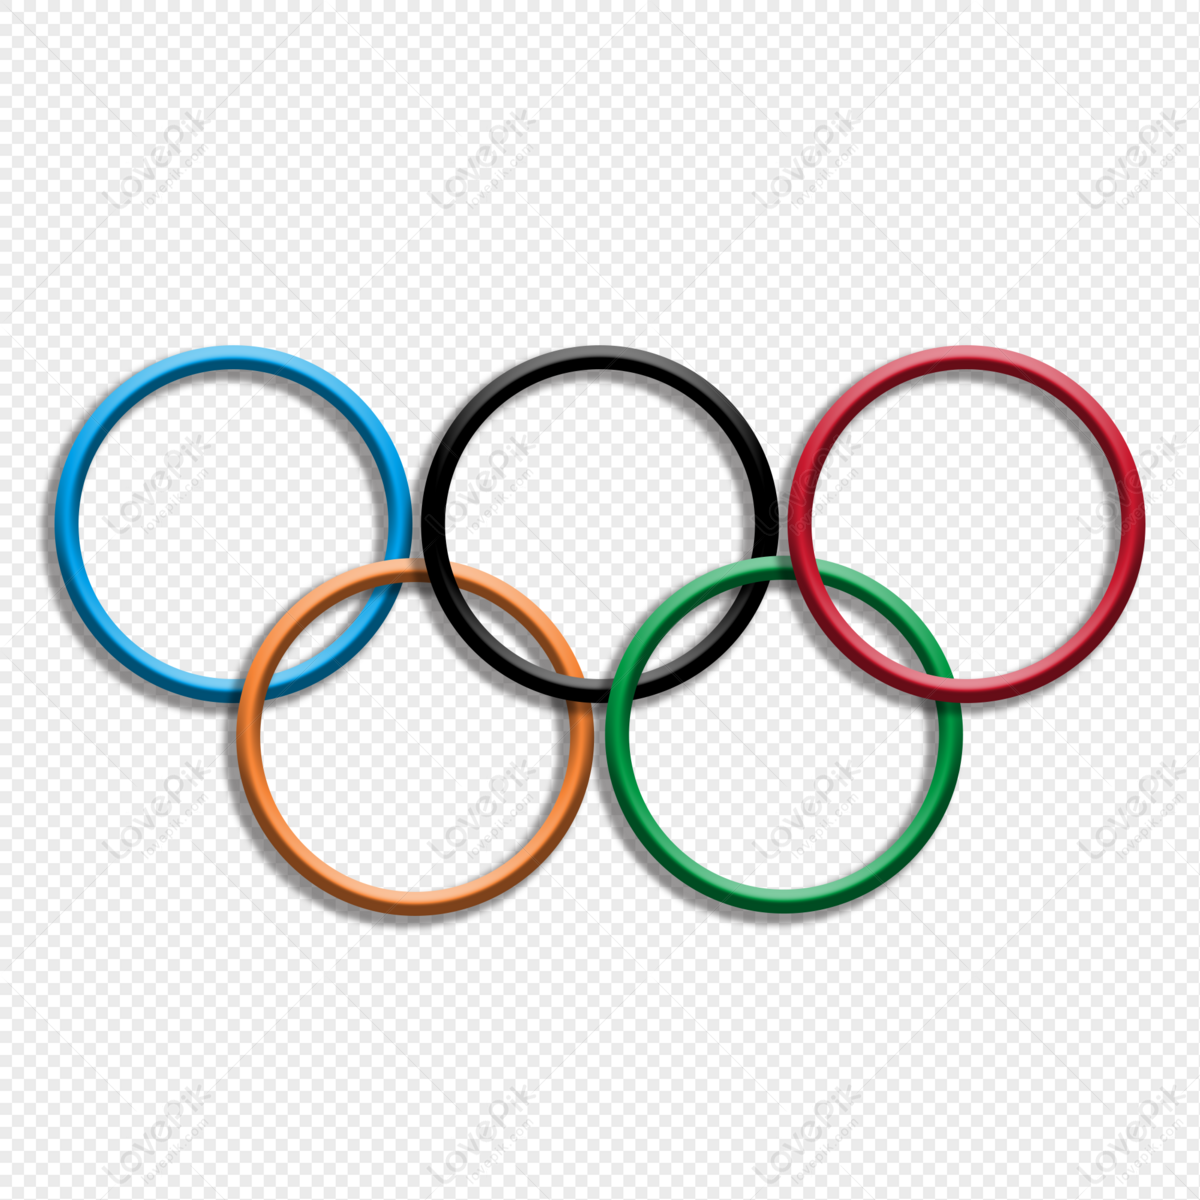 Free: 2016 Summer Olympics 2004 Summer Olympics Rio de Janeiro NASDAQ:PNTR  Pointer Telocation, The Olympic Rings transparent background PNG clipart -  nohat.cc